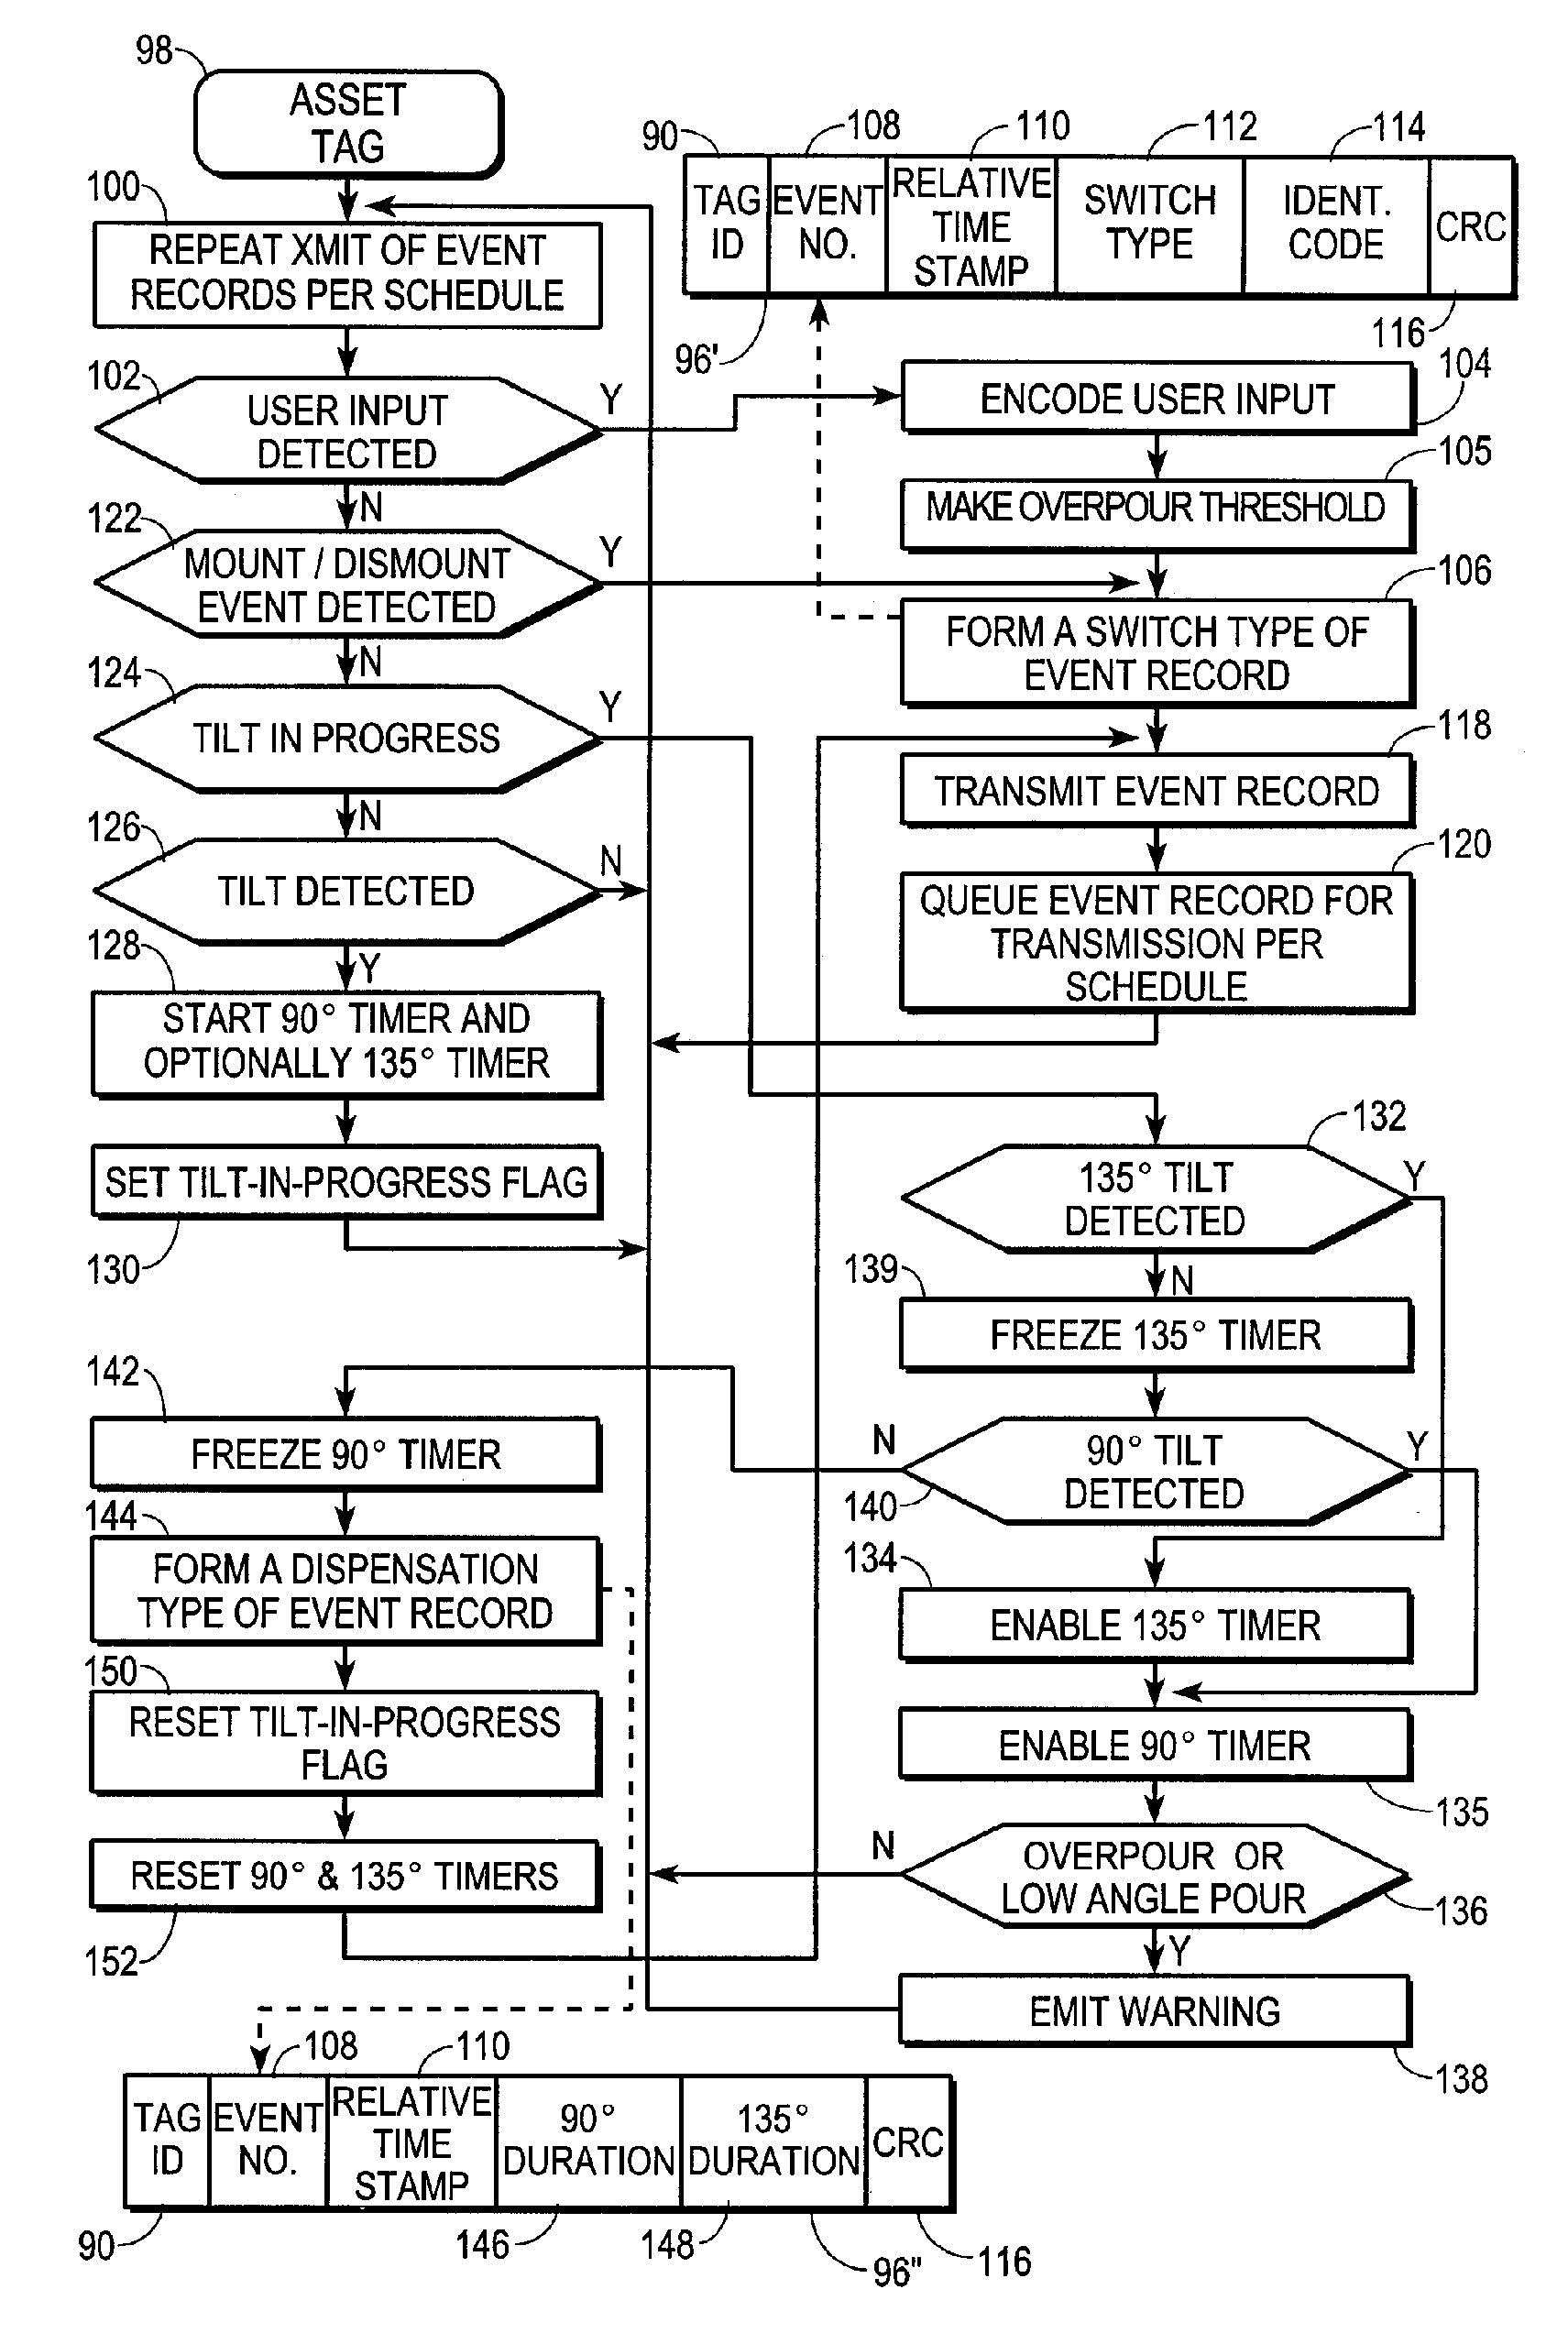 System and Method for Managing the Dispensation of a Bulk Product